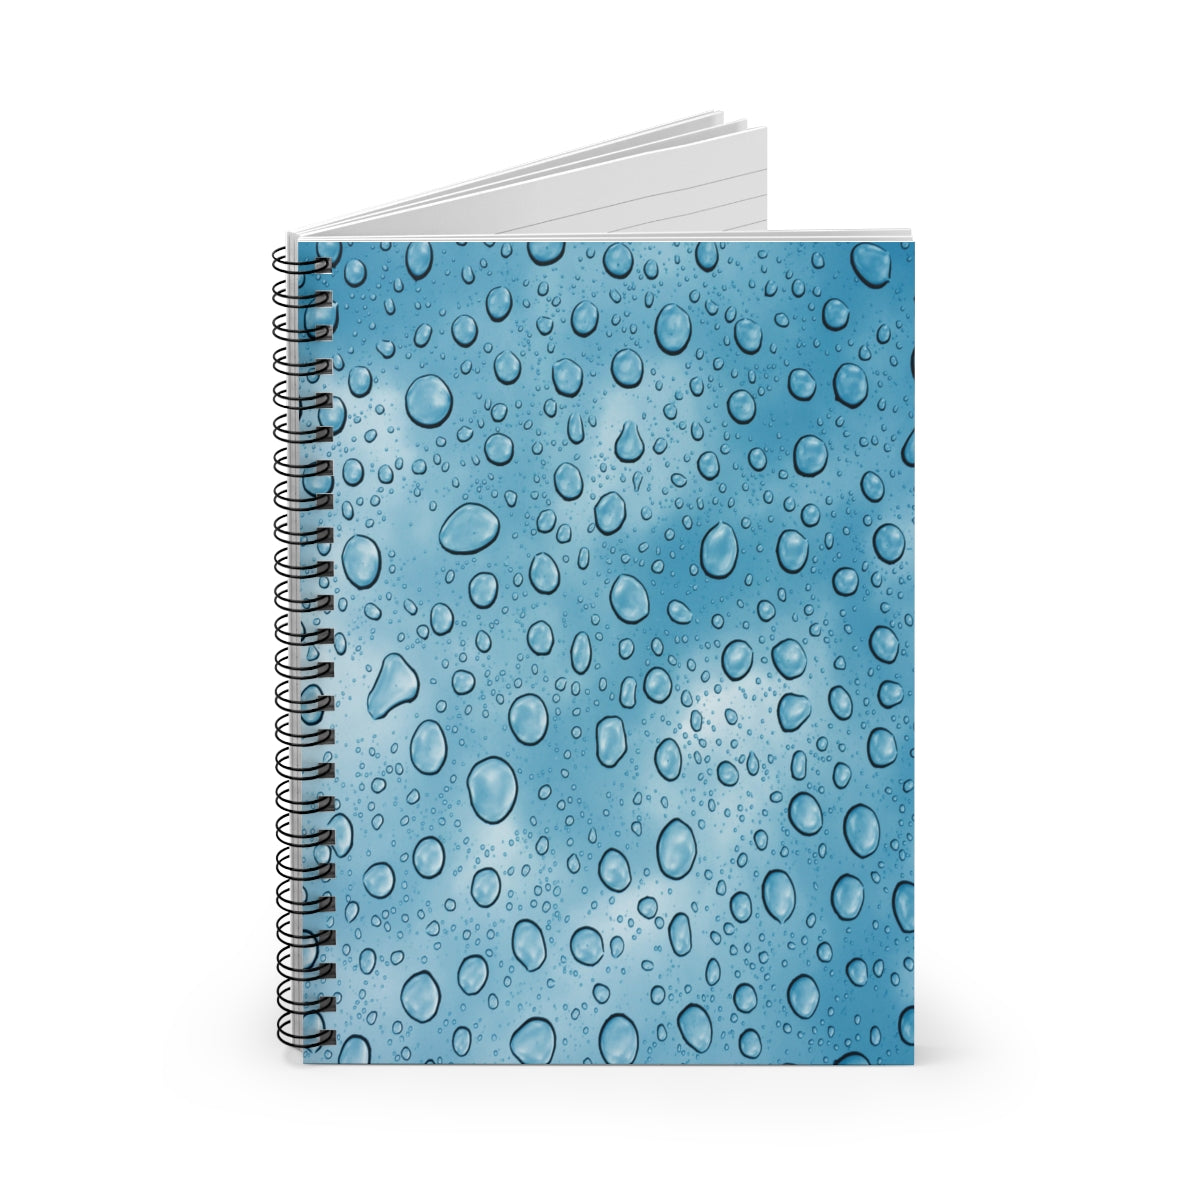 Blue Water Droplets Spiral Ruled Line Notebook